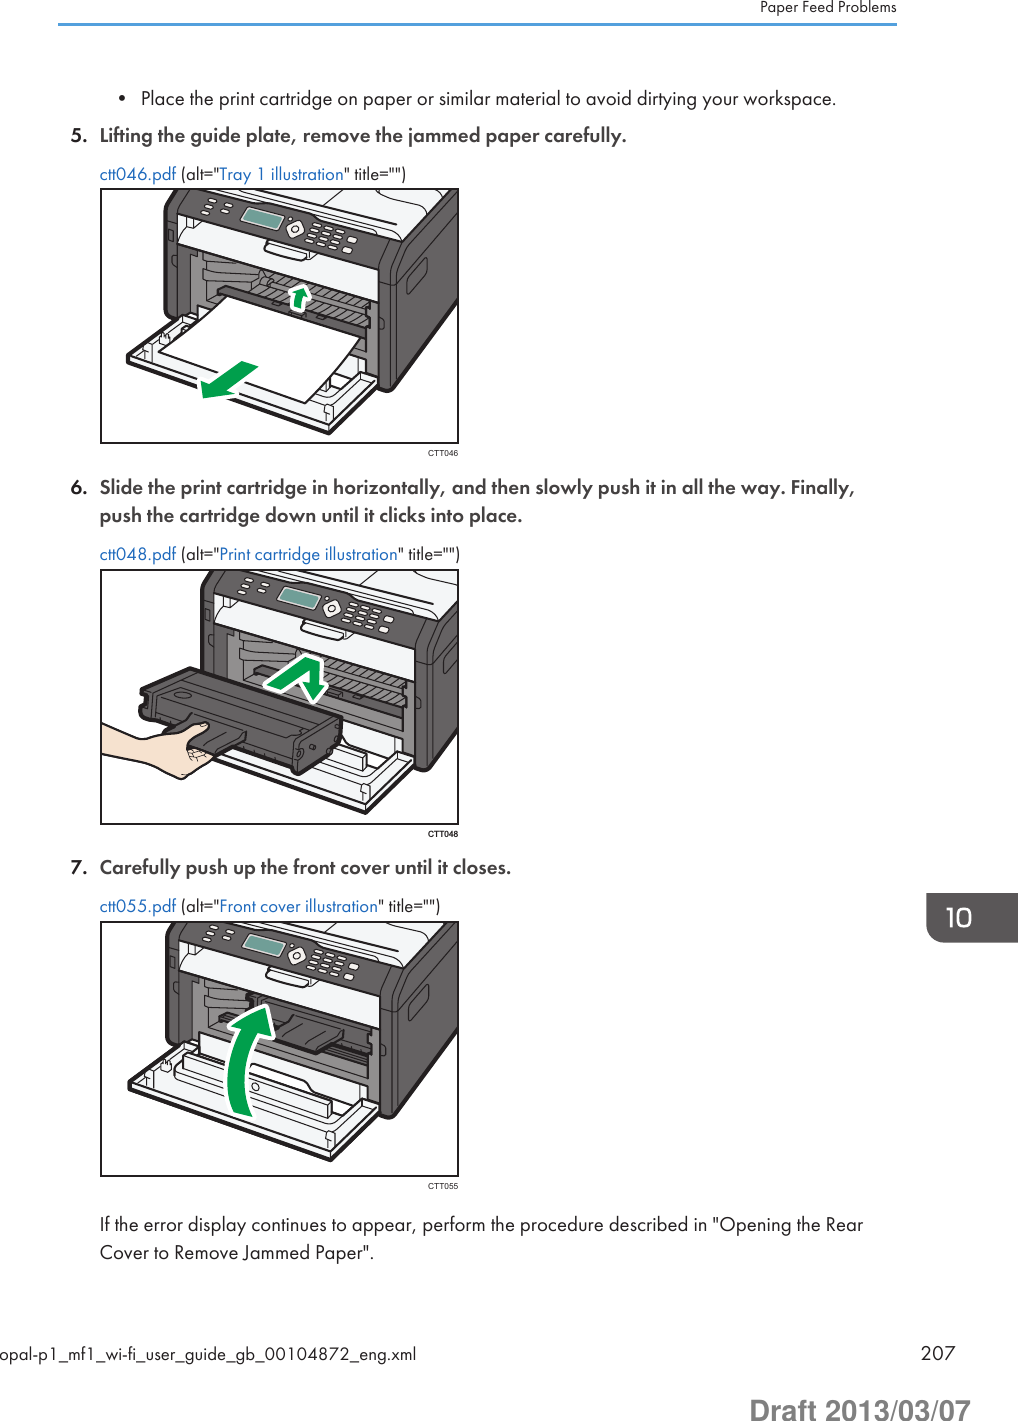 • Place the print cartridge on paper or similar material to avoid dirtying your workspace.5. Lifting the guide plate, remove the jammed paper carefully.ctt046.pdf (alt=&quot;Tray 1 illustration&quot; title=&quot;&quot;)CTT0466. Slide the print cartridge in horizontally, and then slowly push it in all the way. Finally,push the cartridge down until it clicks into place.ctt048.pdf (alt=&quot;Print cartridge illustration&quot; title=&quot;&quot;)CTT0487. Carefully push up the front cover until it closes.ctt055.pdf (alt=&quot;Front cover illustration&quot; title=&quot;&quot;)CTT055If the error display continues to appear, perform the procedure described in &quot;Opening the RearCover to Remove Jammed Paper&quot;.Paper Feed Problemsopal-p1_mf1_wi-fi_user_guide_gb_00104872_eng.xml 207Draft 2013/03/07